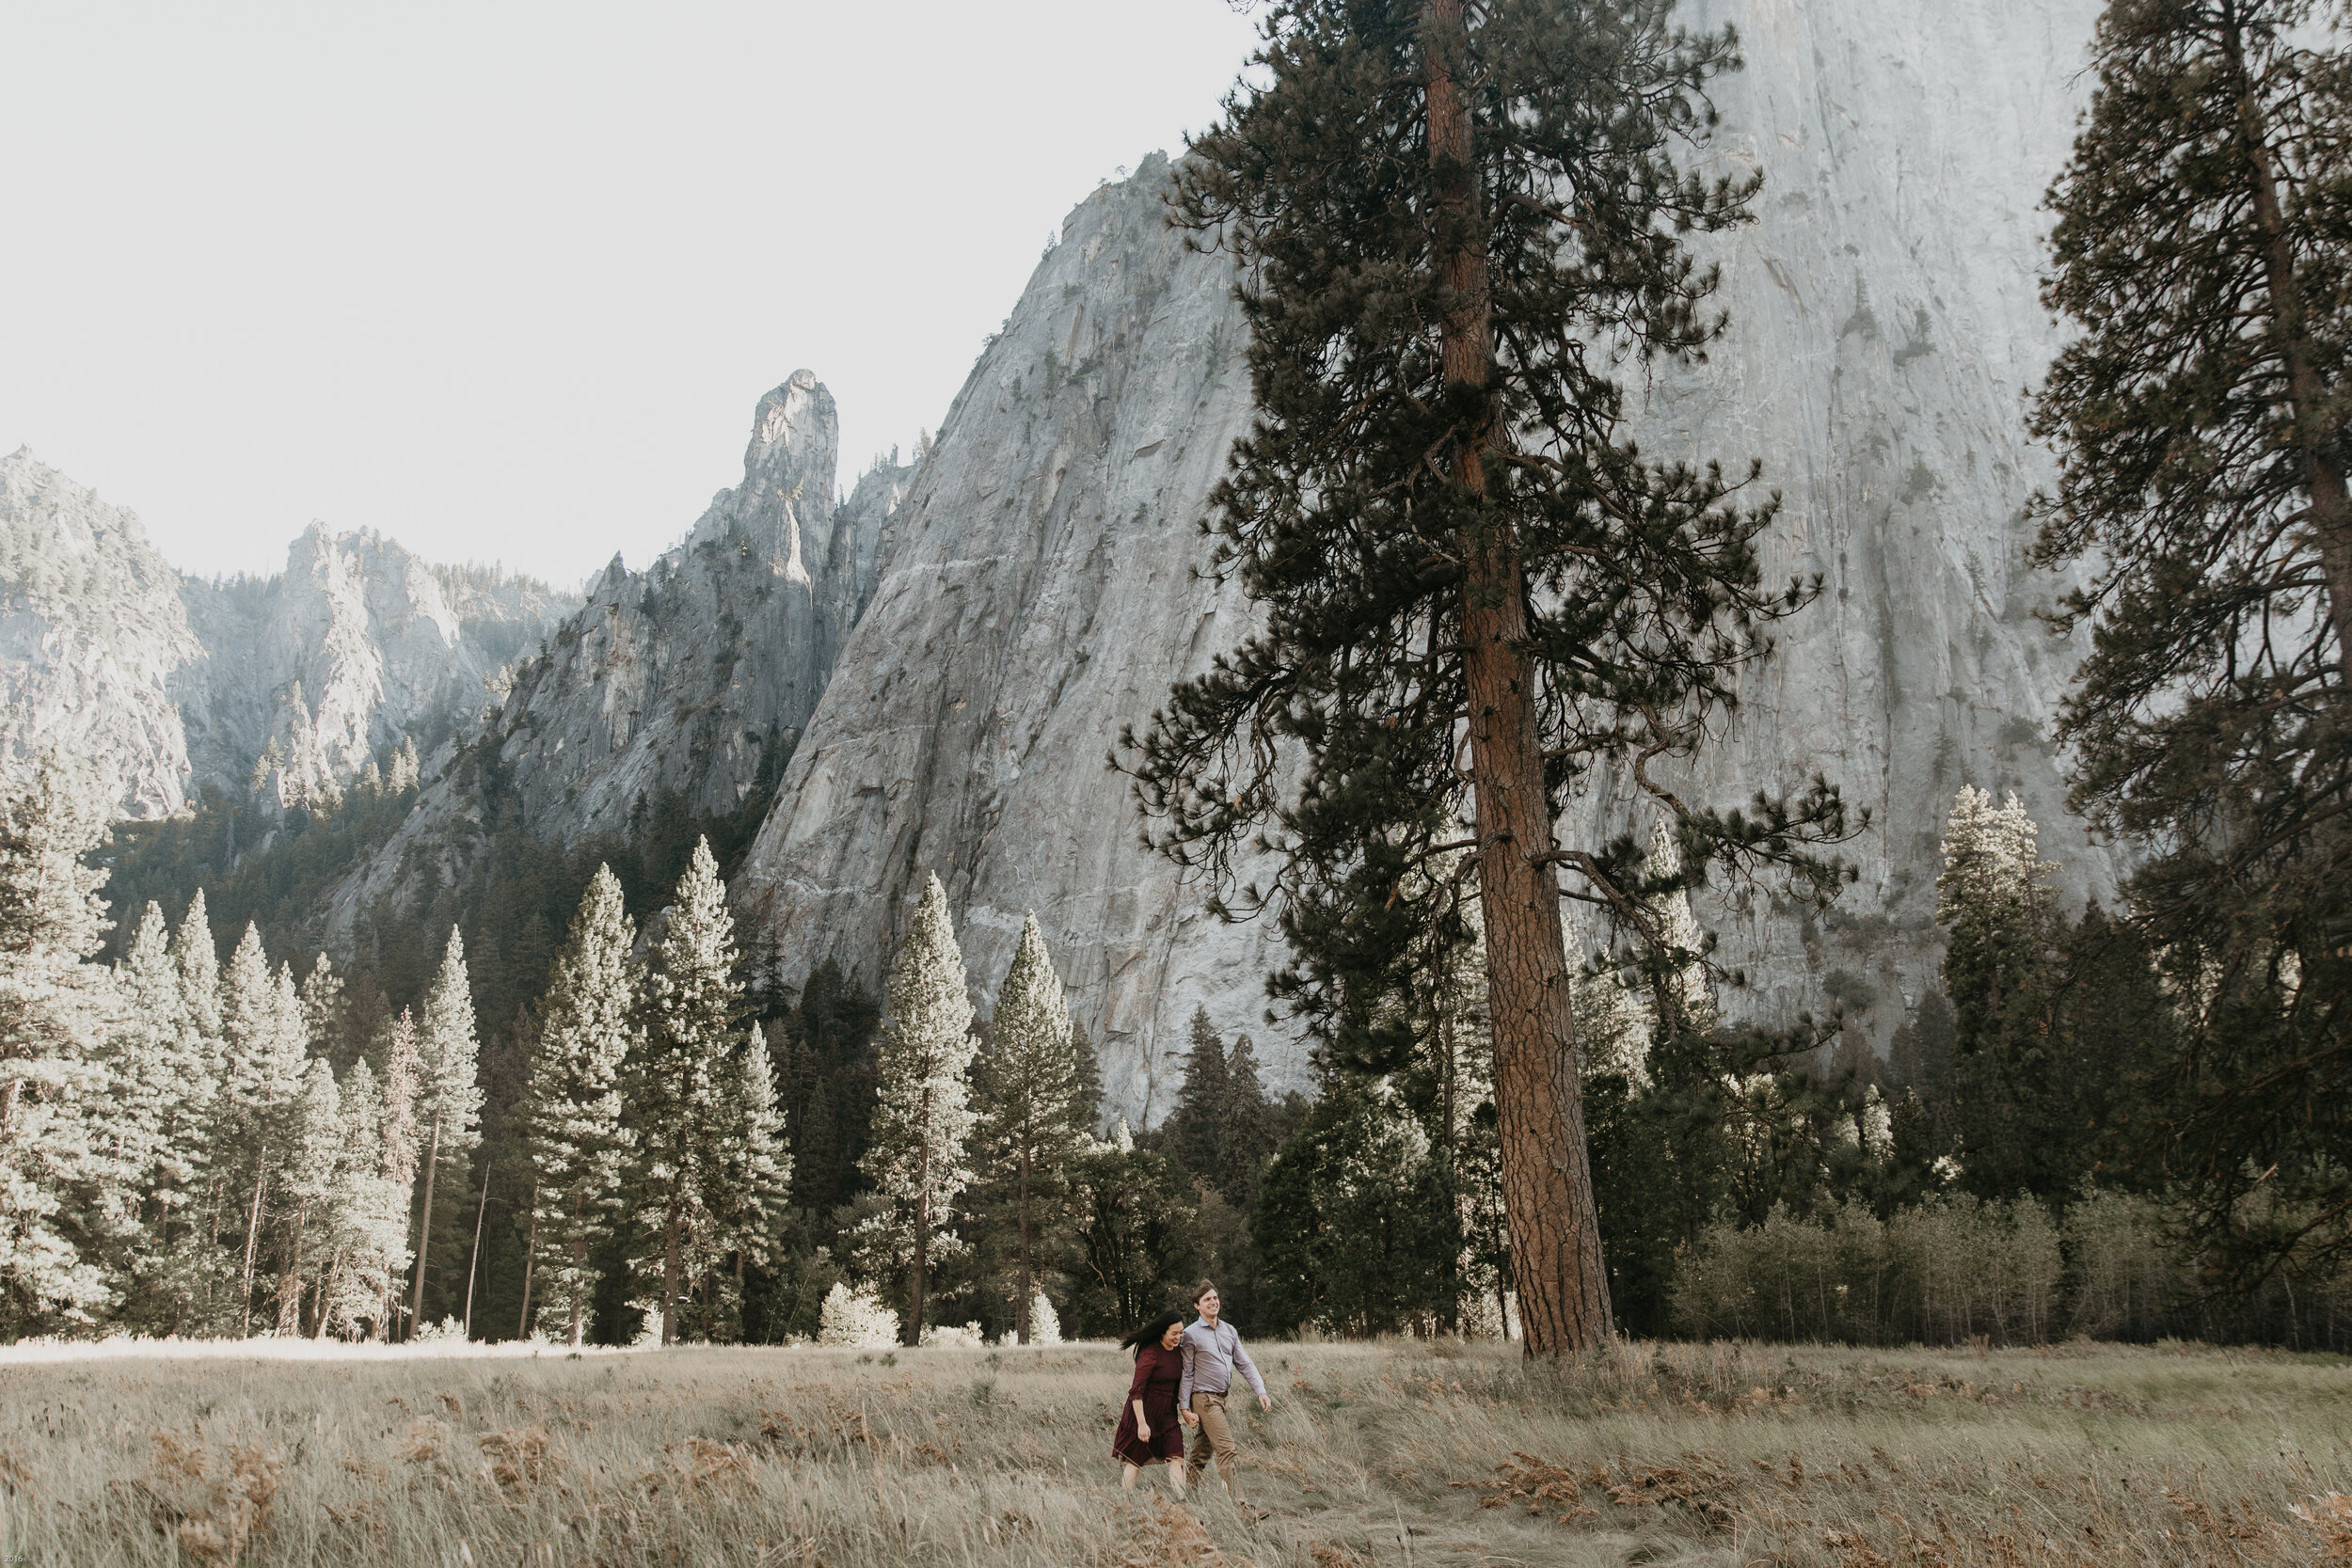 yosemite-national-park-couples-session-at-taft-point-and-yosemite-valley-yosemite-elopement-photographer-nicole-daacke-photography-101.jpg